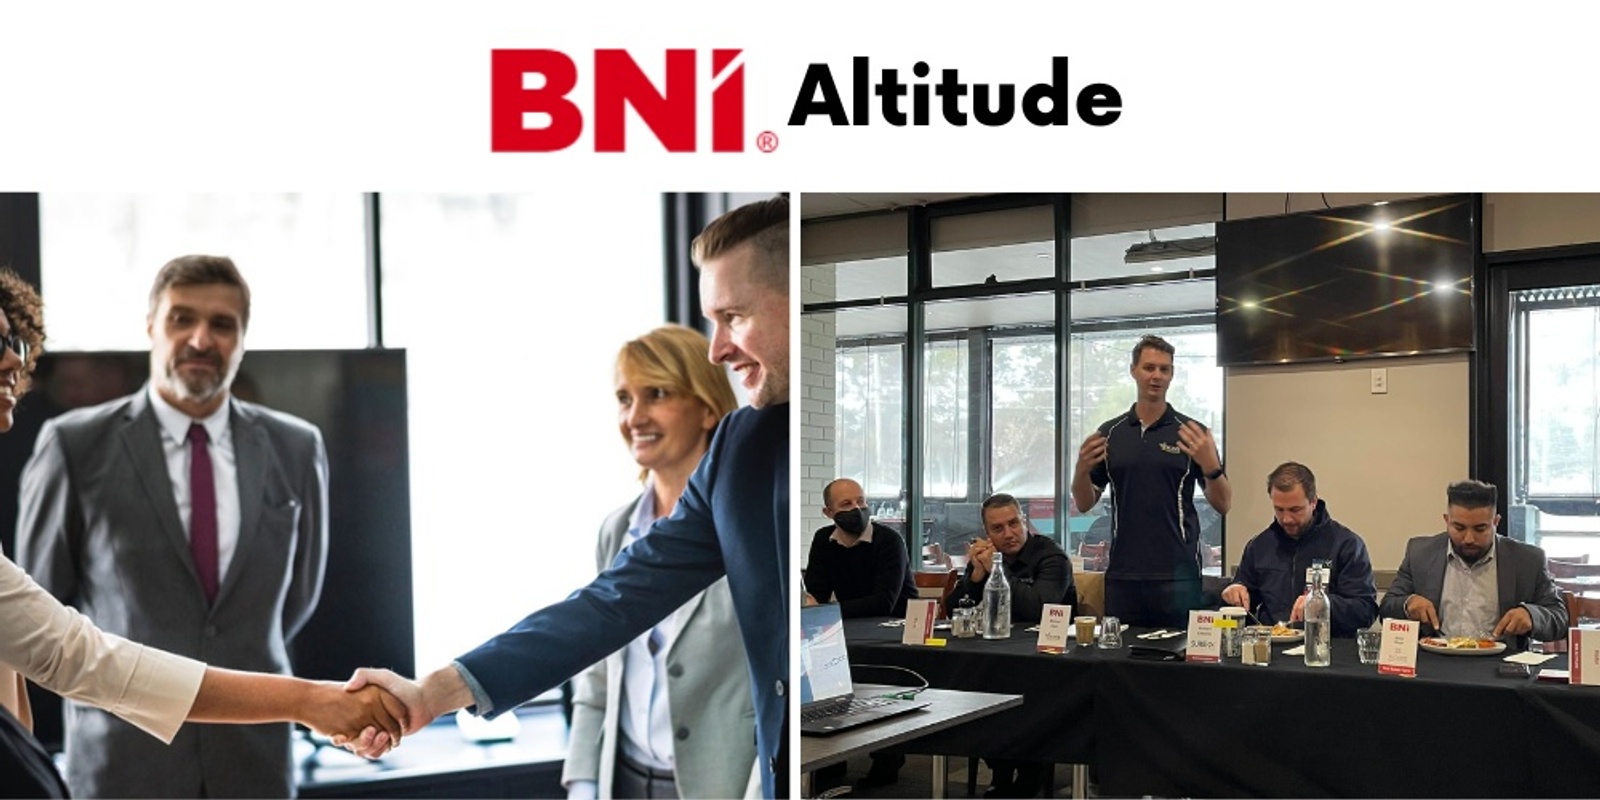 BNI Altitude » Weekly Business Networking Breakfast » Visitors Welcome